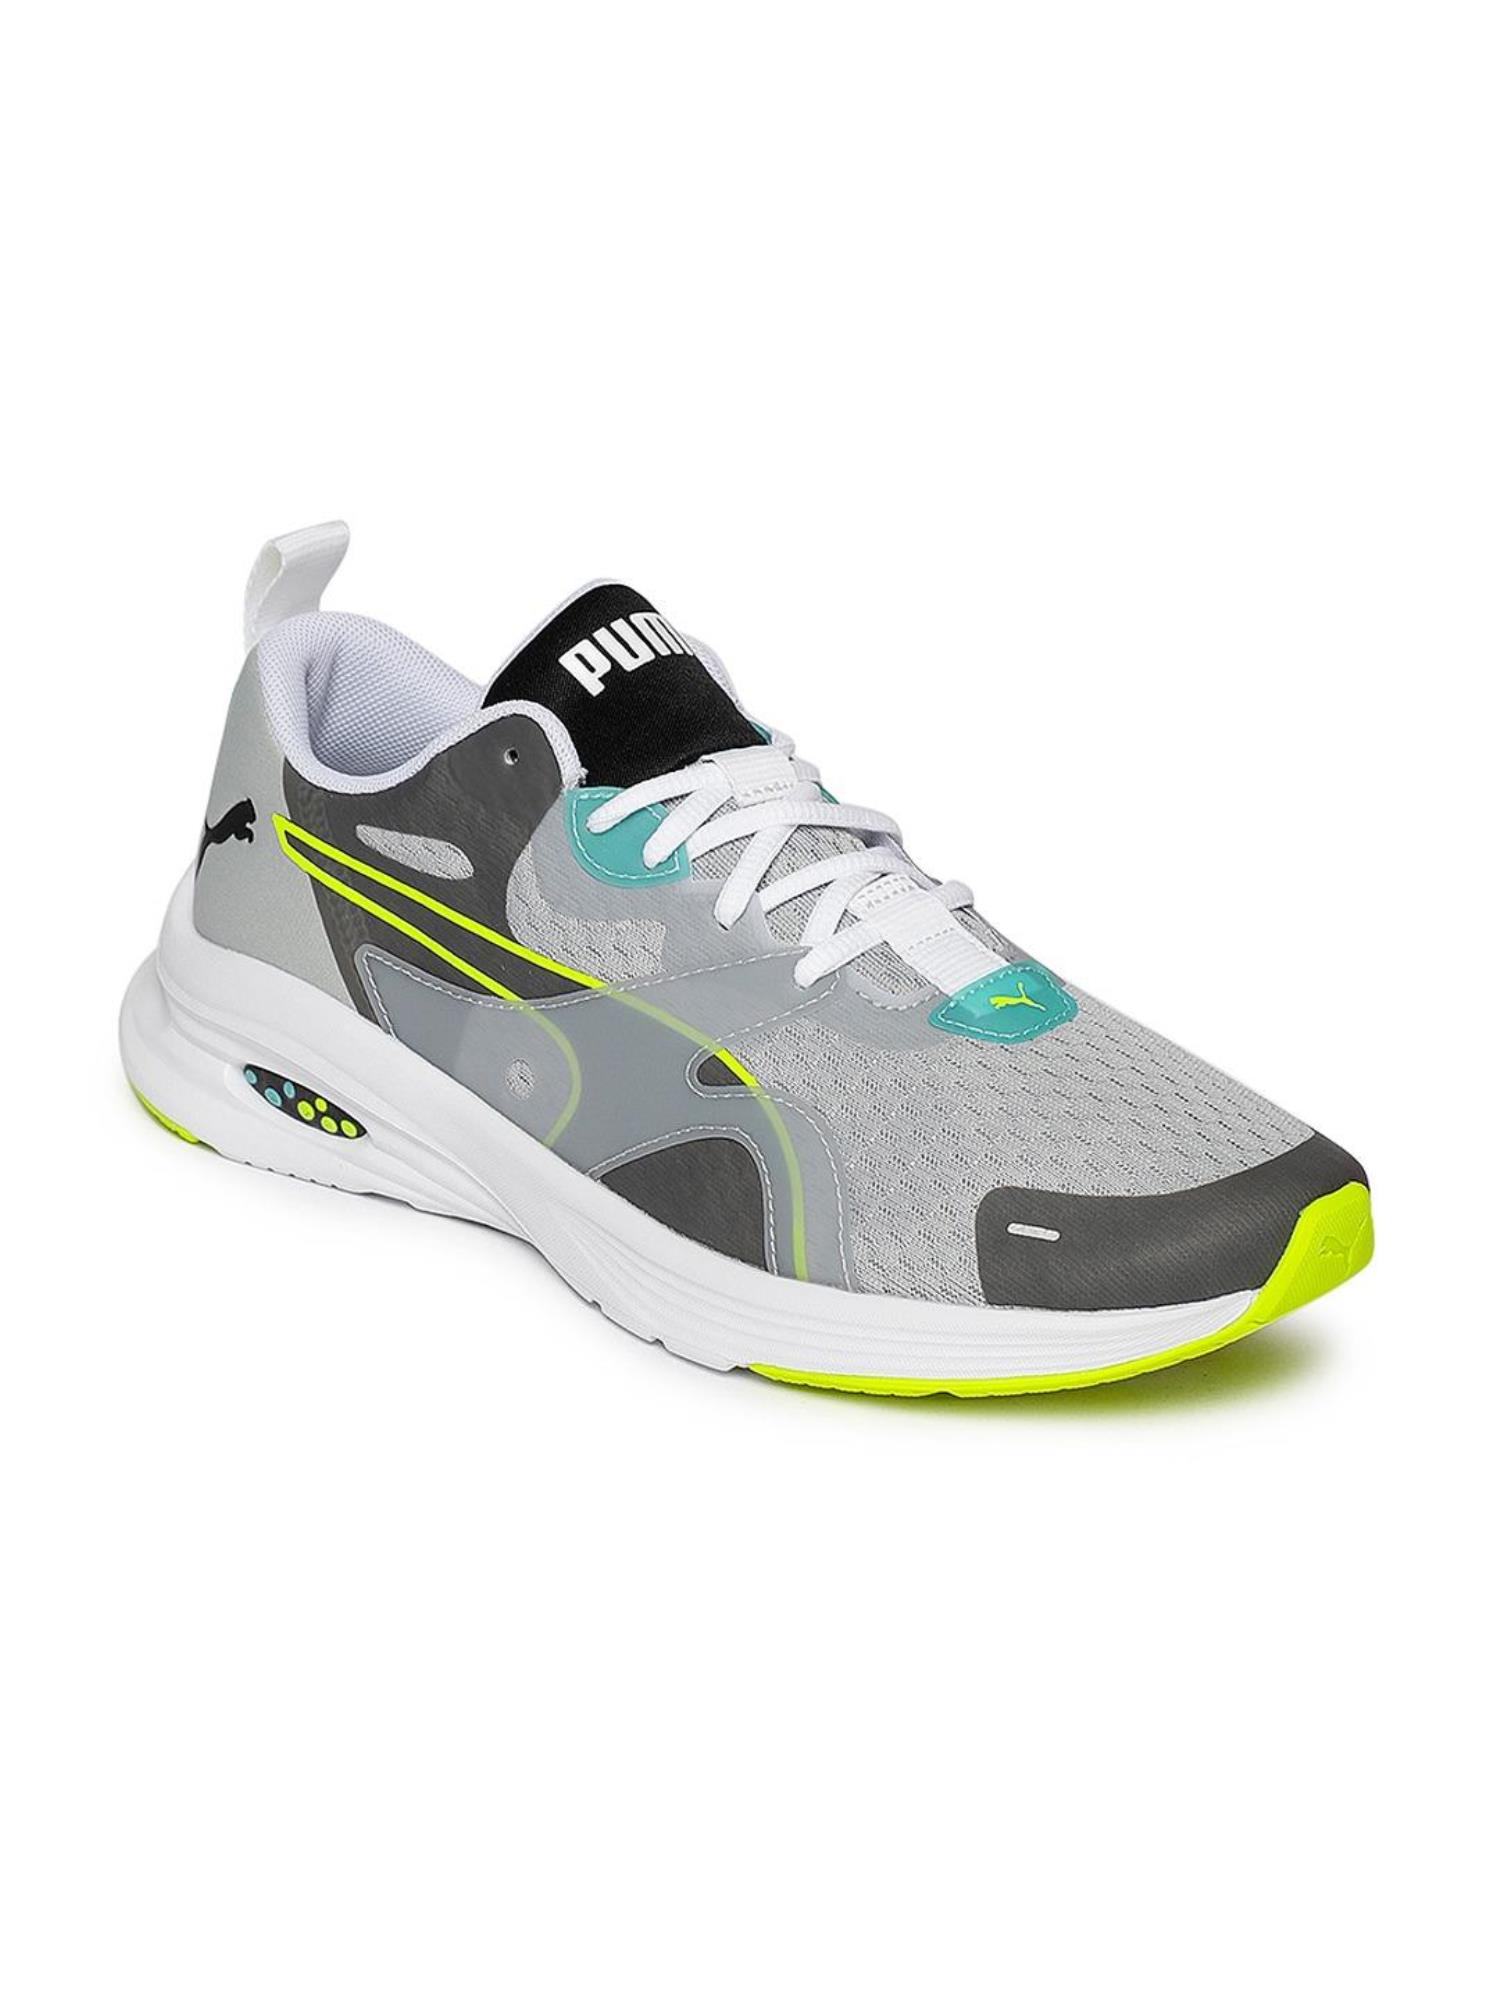 Puma Brand Men's Hybird Fuego Sports Shoes 192661 04 (Grey/Lime) ::  RAJASHOES